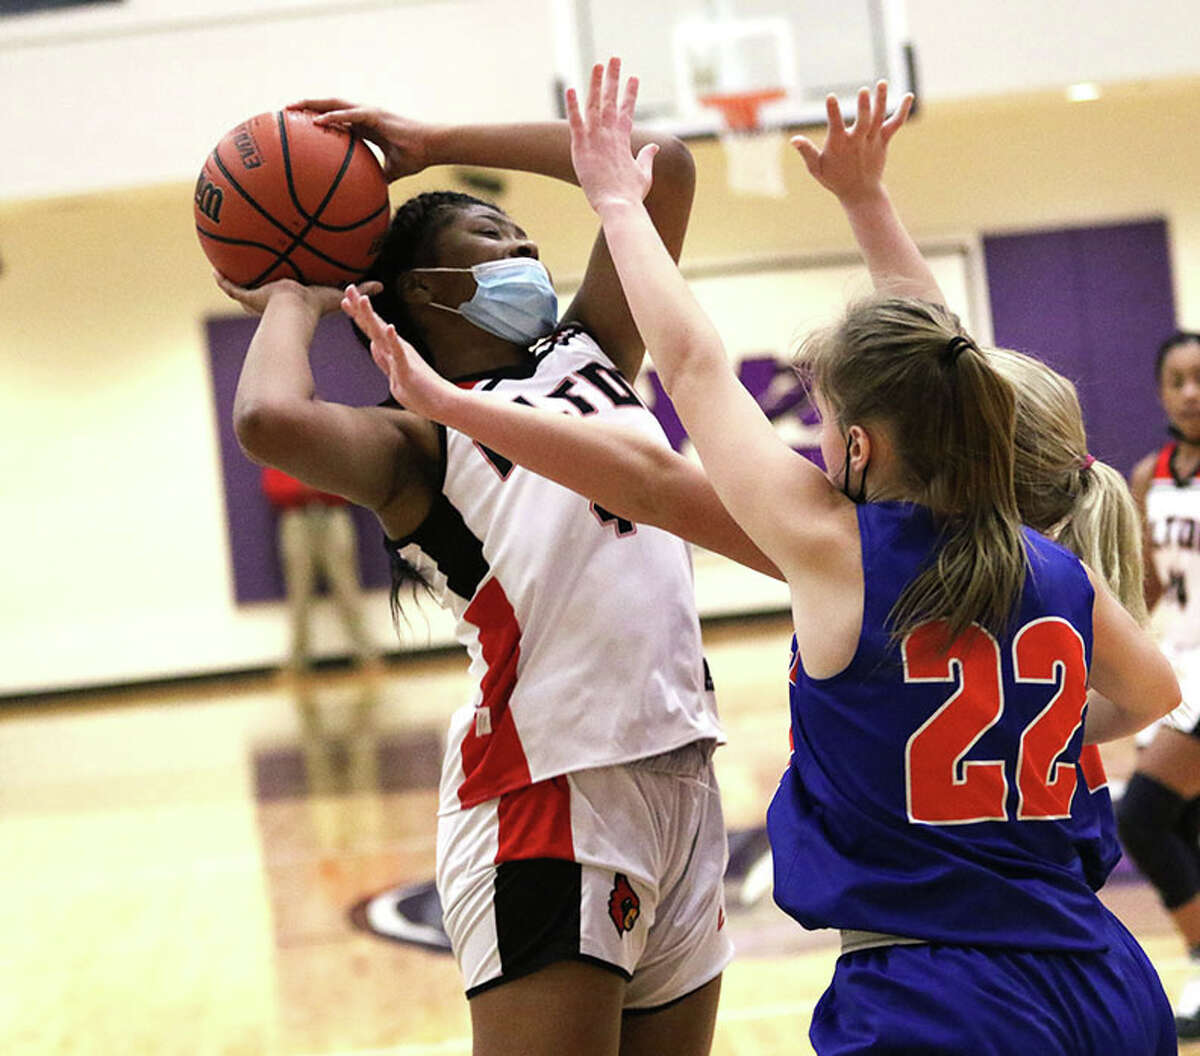 Alton's Jarius Powers (left) shoots over Okawville's Raelyn Obermeier (22) in Wednesday's title game at the 43rd Mascoutah Invitational girls basketball tournament in Mascoutah.